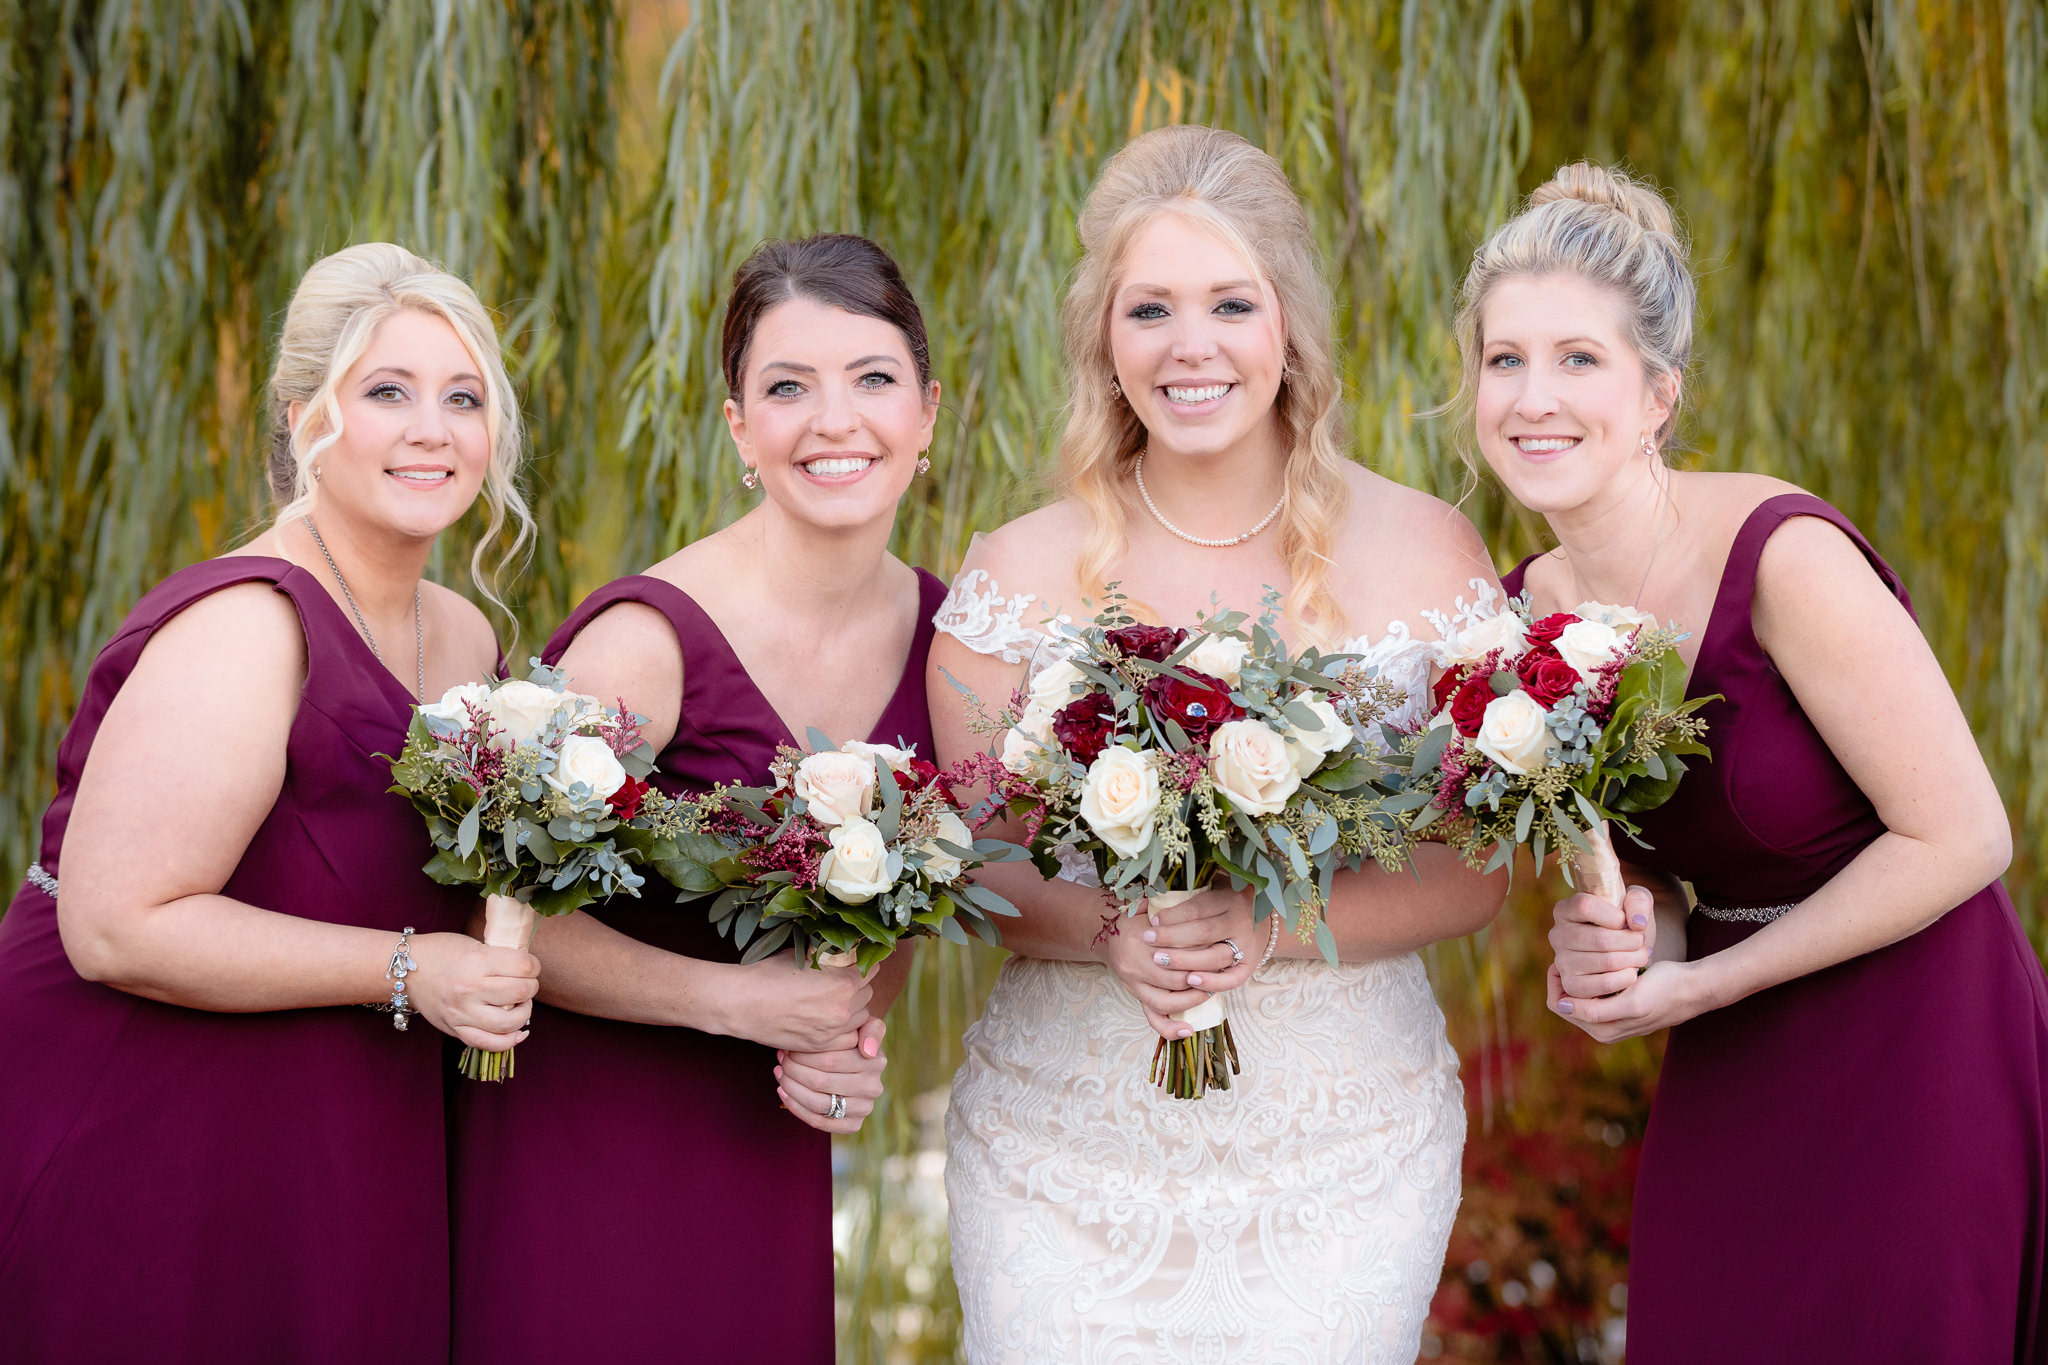 Bride with her bridesmaids in burgundy Morilee dresses from MB Bride